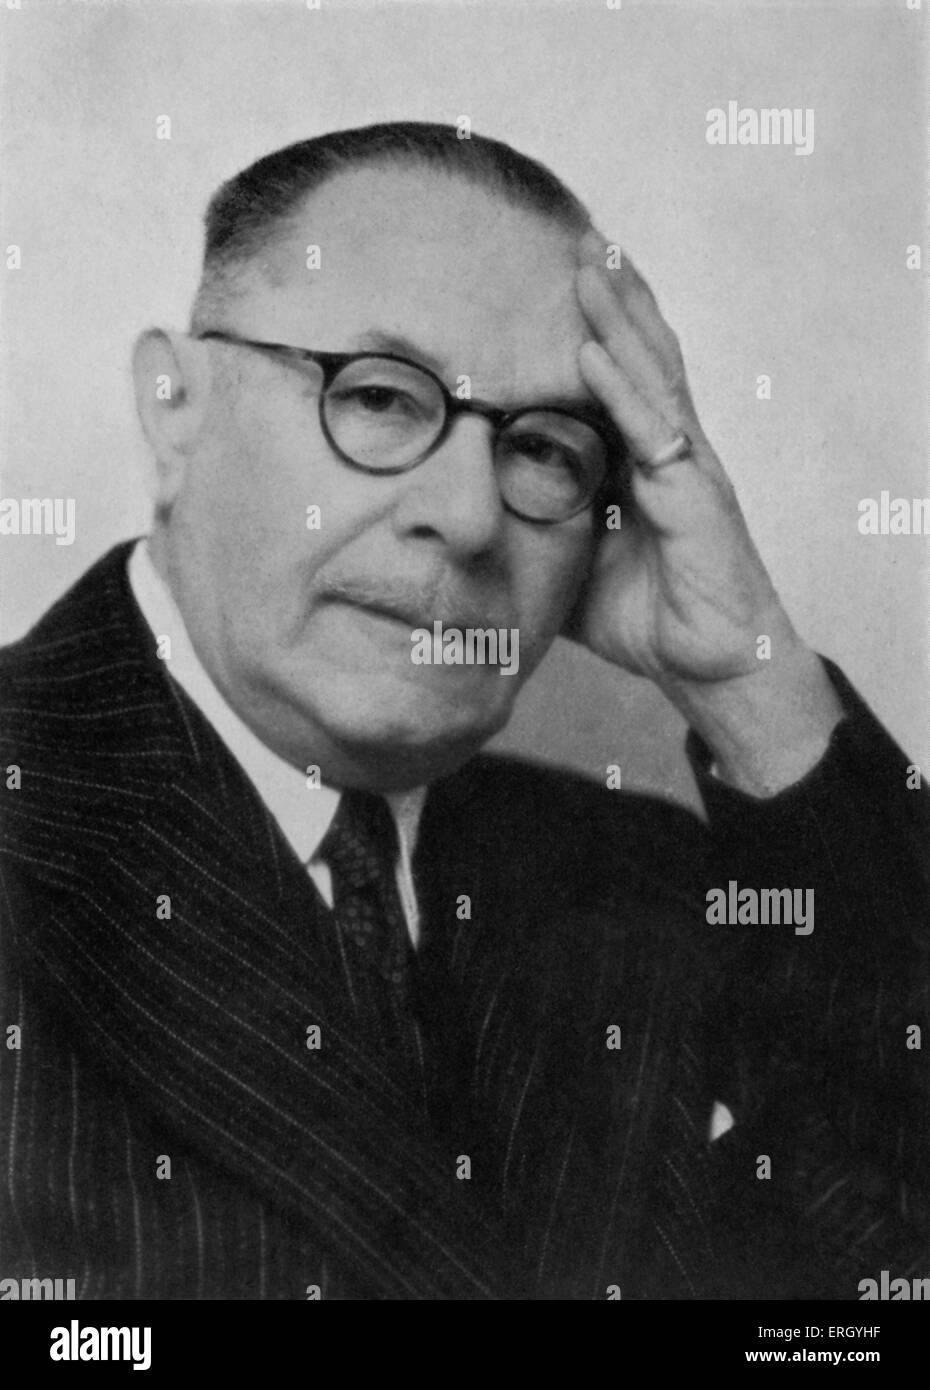 Siegfried Trebitsch in 1942. Austrian playwright, poet, author and translator, 21 December 1869 - 3 July 1956. Stock Photo